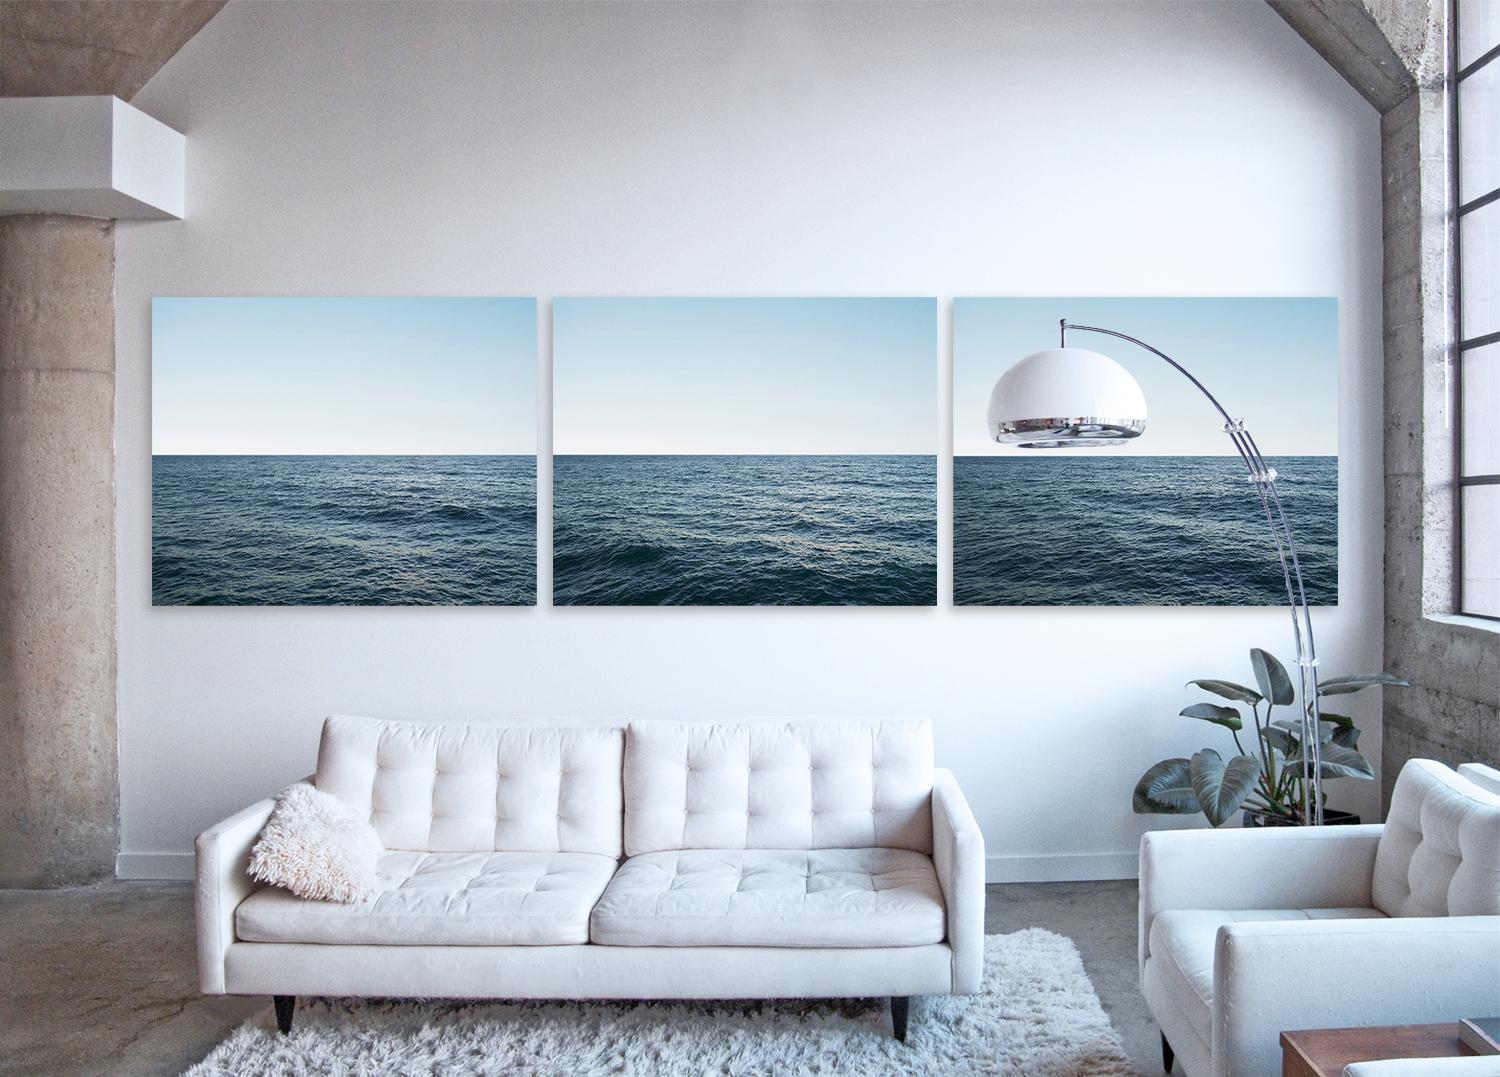 Seascape Xl Triptych - large format photographs of blue water surface + horizon - Contemporary Photograph by Frank Schott